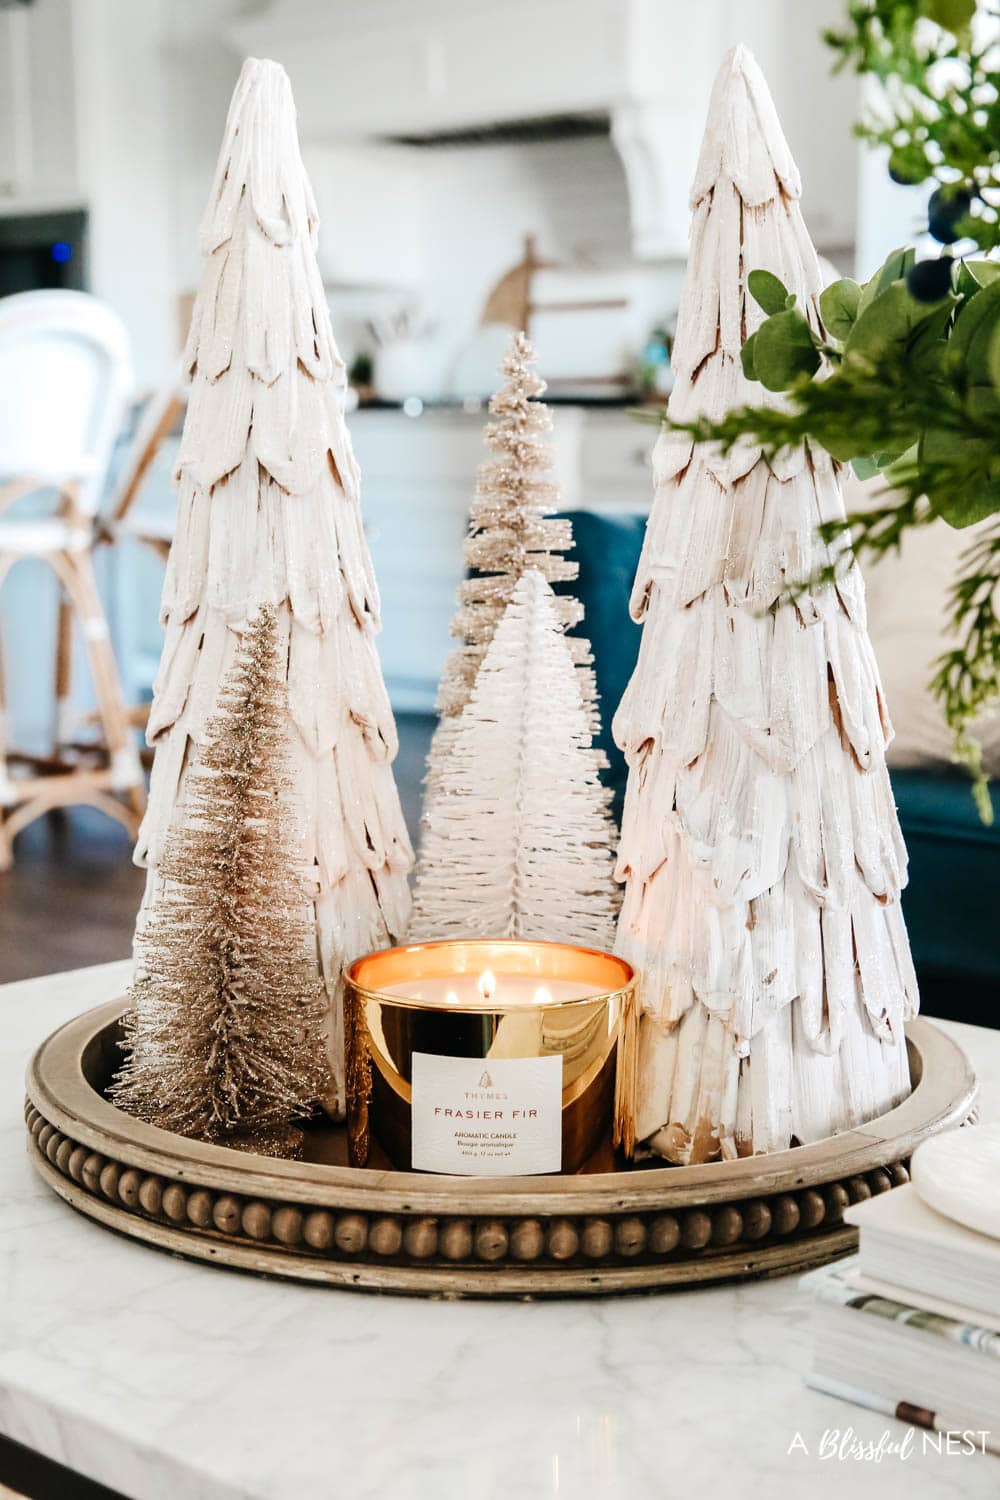 The Scent of The Season with Thymes